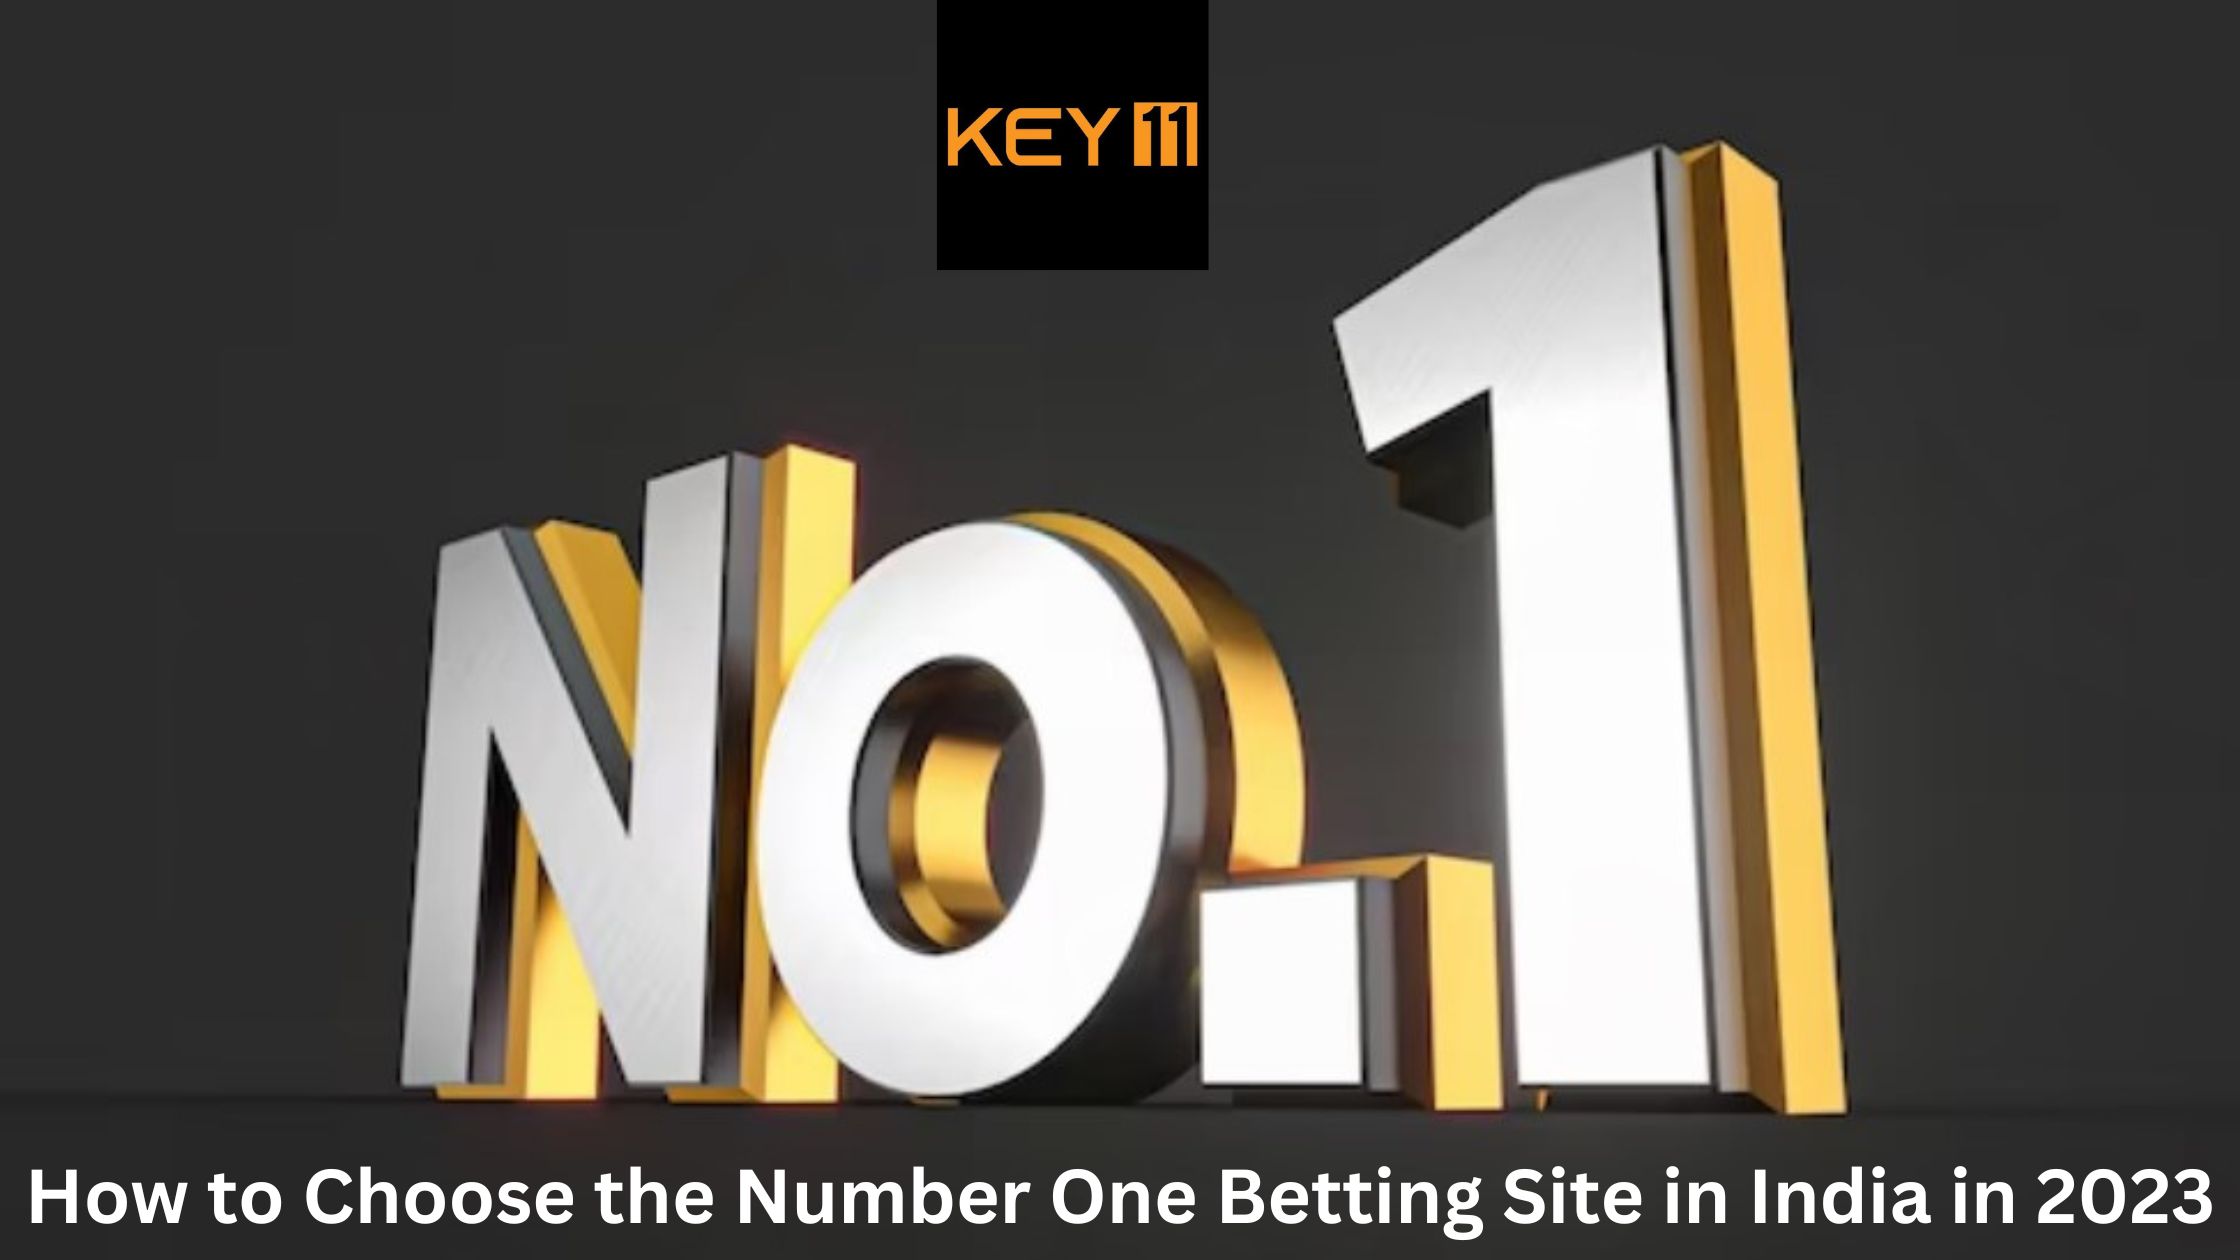 Number One Betting Site in India in 2023